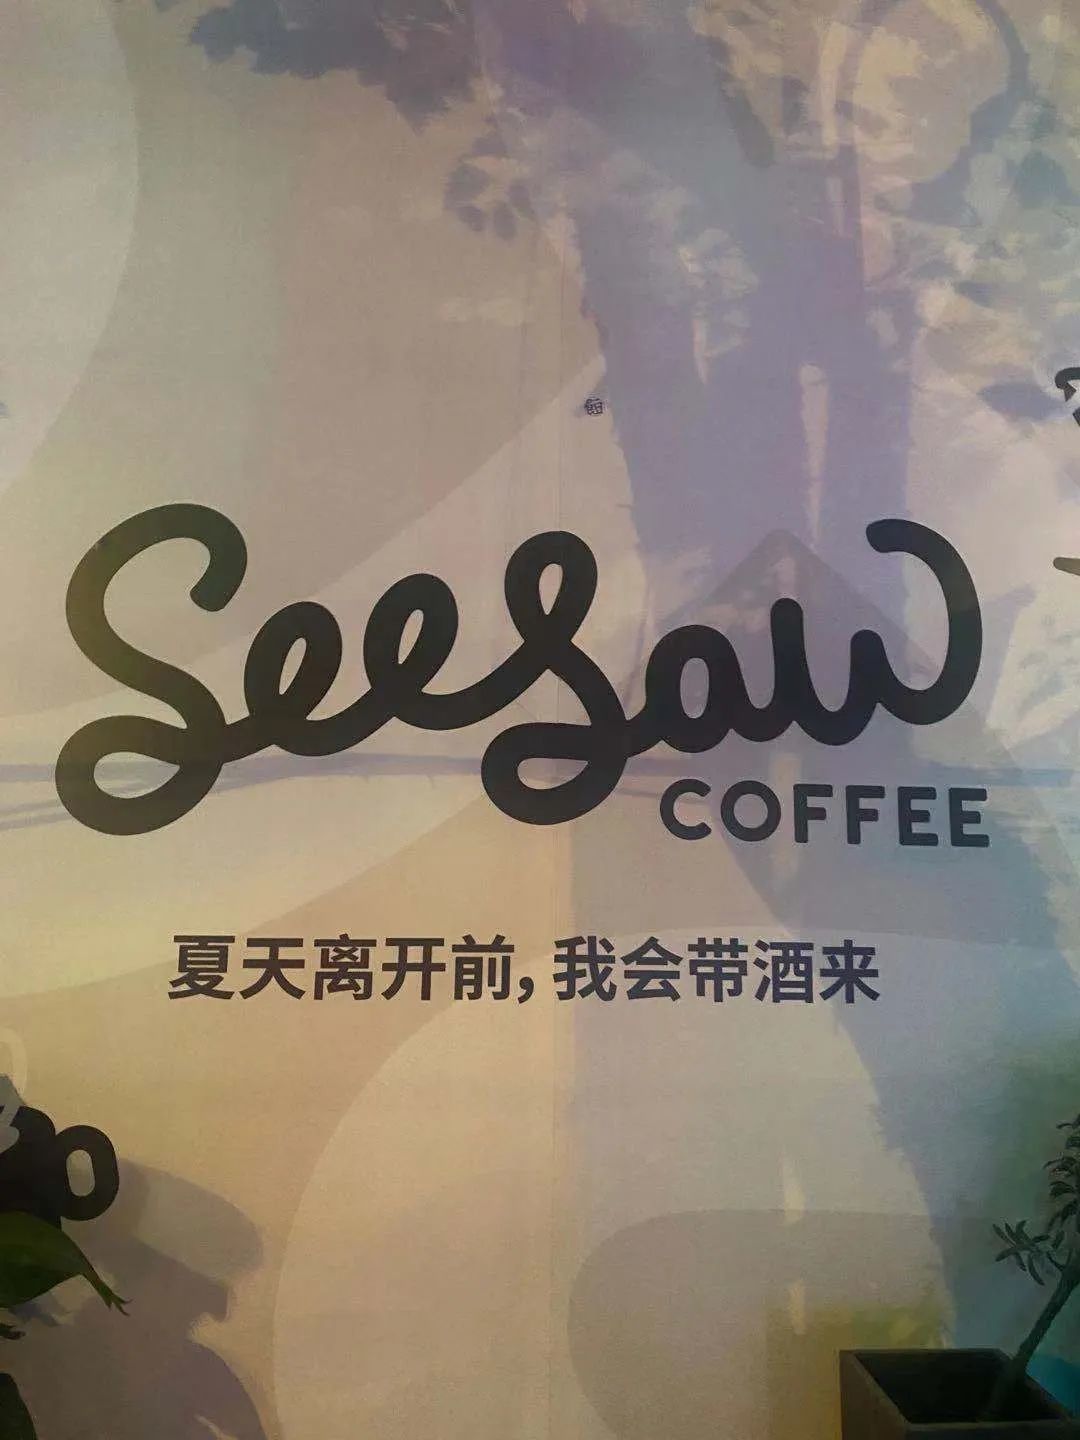 Is there any wine in the cafe? Domestic boutique coffee brand Seesaw has also opened a night wine coffee shop to sell alcohol.